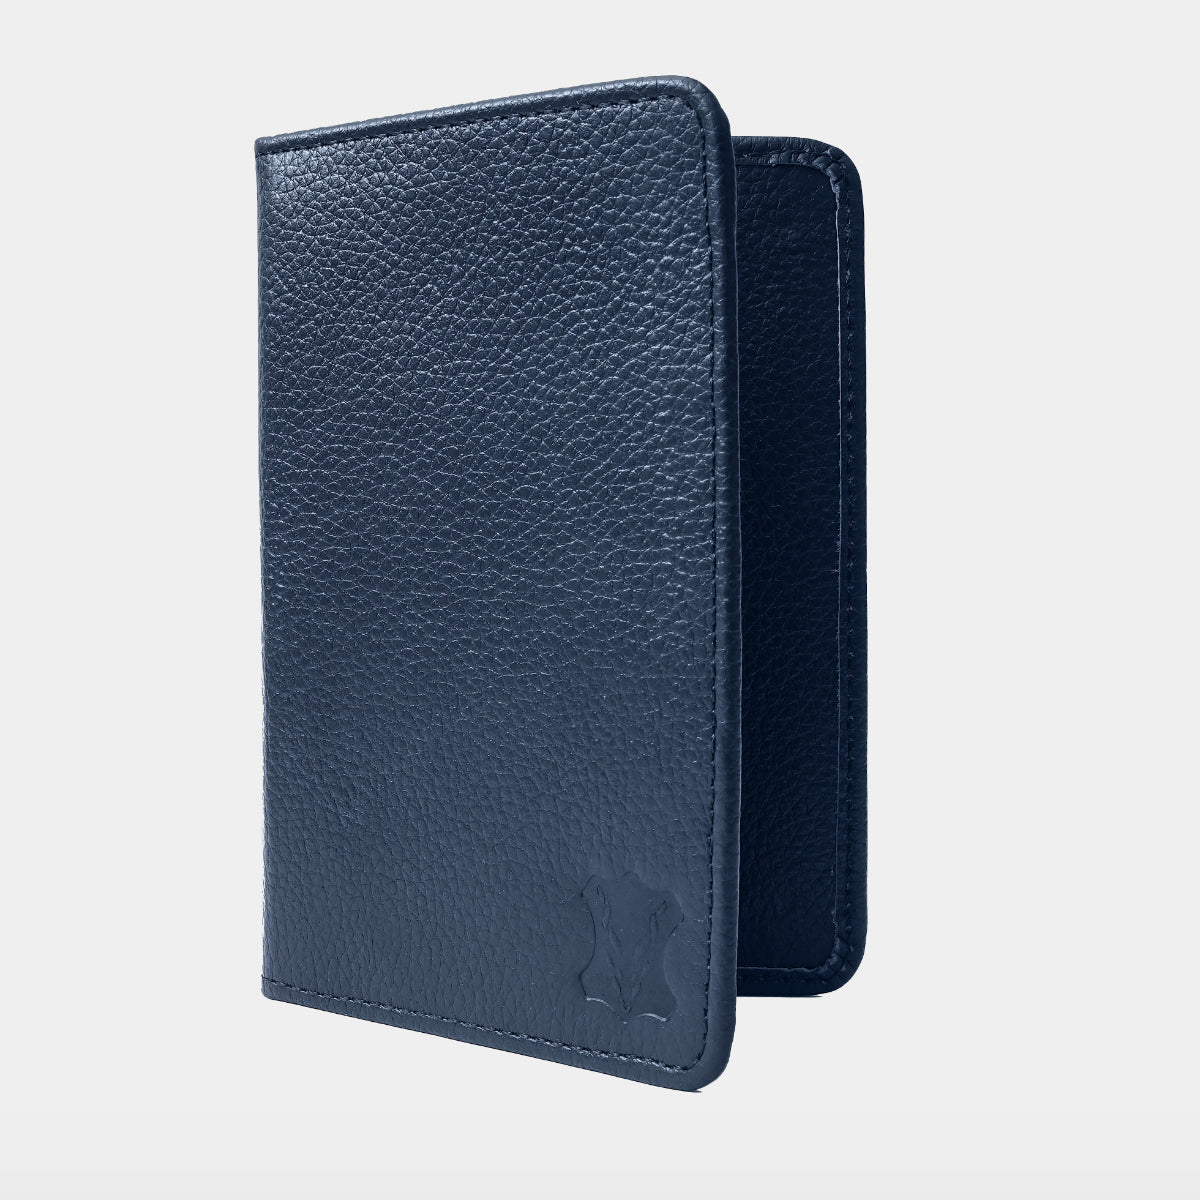 Passport Cover with Card Slots & Luggage Tag